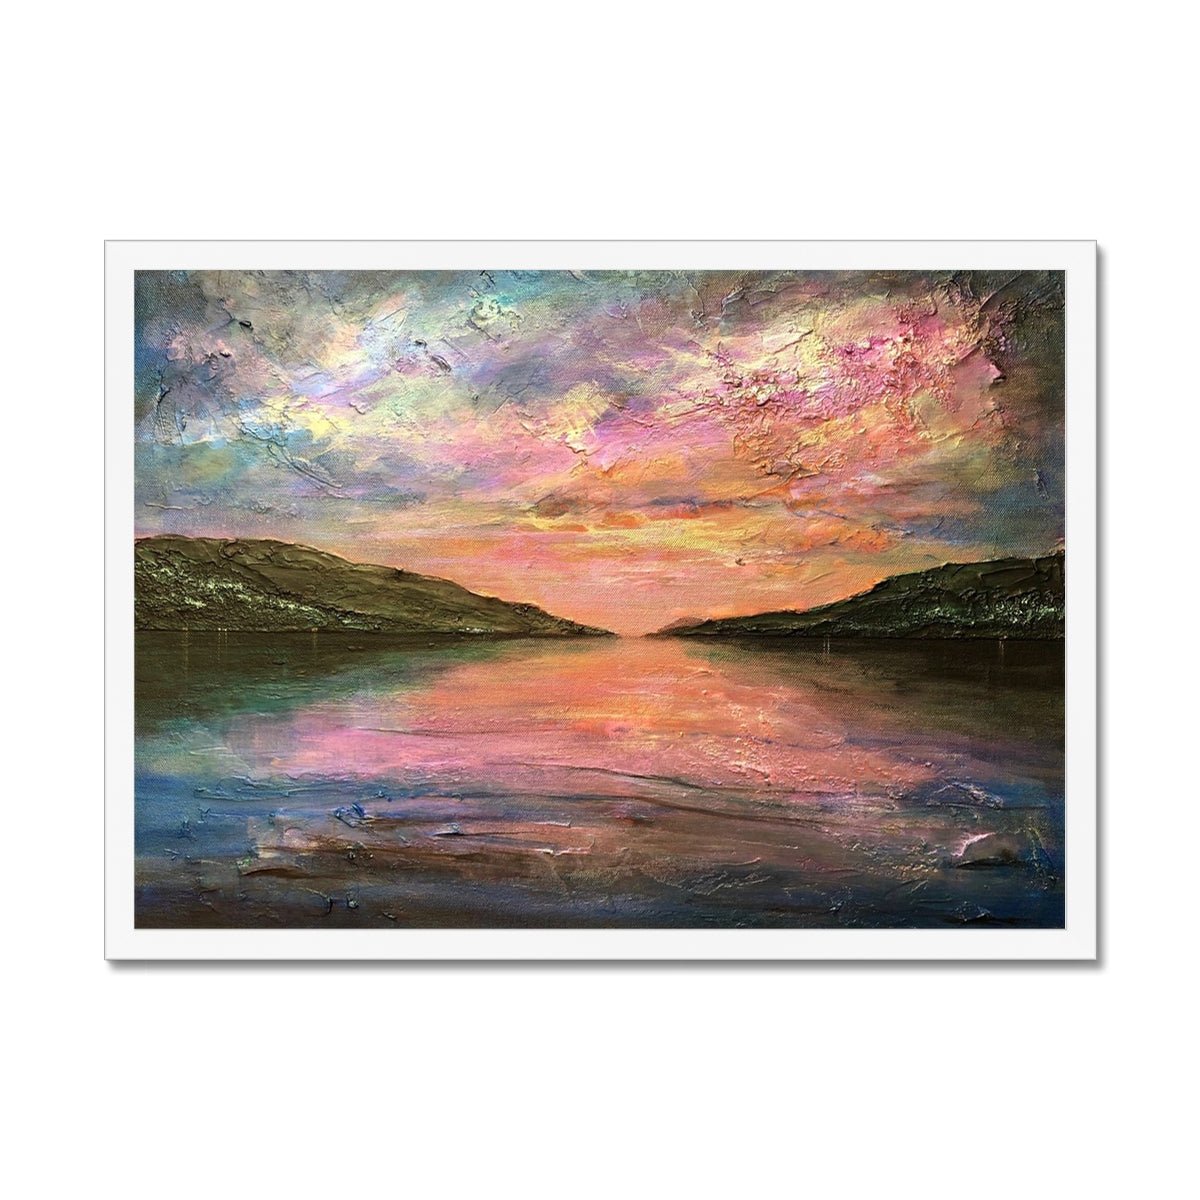 Loch Ness Dawn Painting | Framed Prints From Scotland-Framed Prints-Scottish Lochs & Mountains Art Gallery-A2 Landscape-White Frame-Paintings, Prints, Homeware, Art Gifts From Scotland By Scottish Artist Kevin Hunter